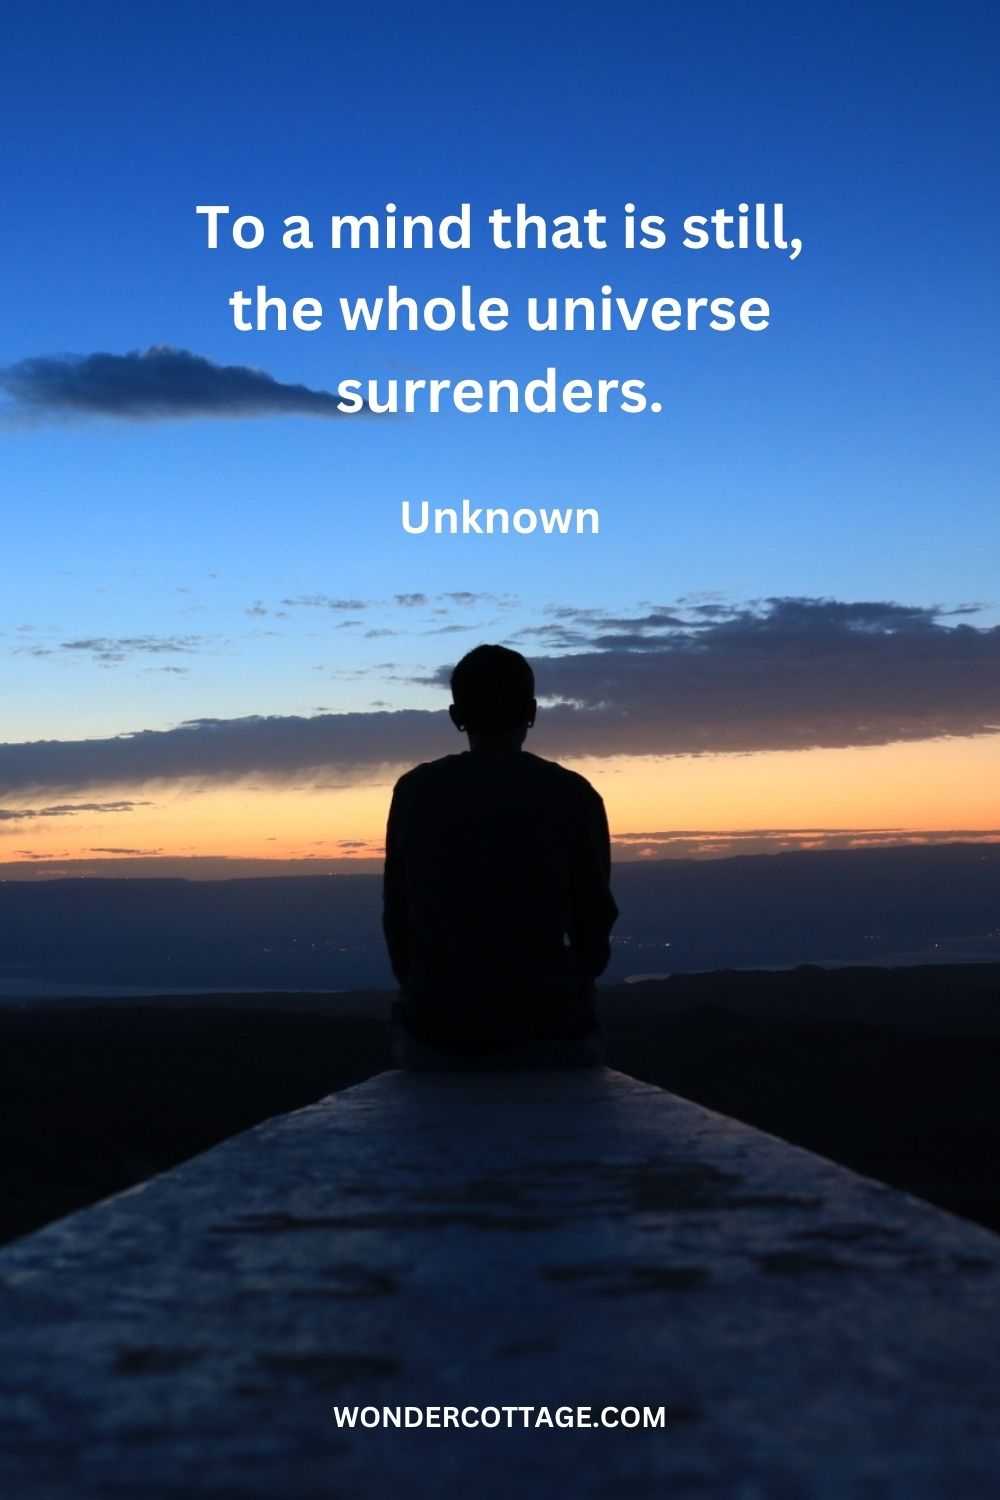 To a mind that is still, the whole universe surrenders. Unknown